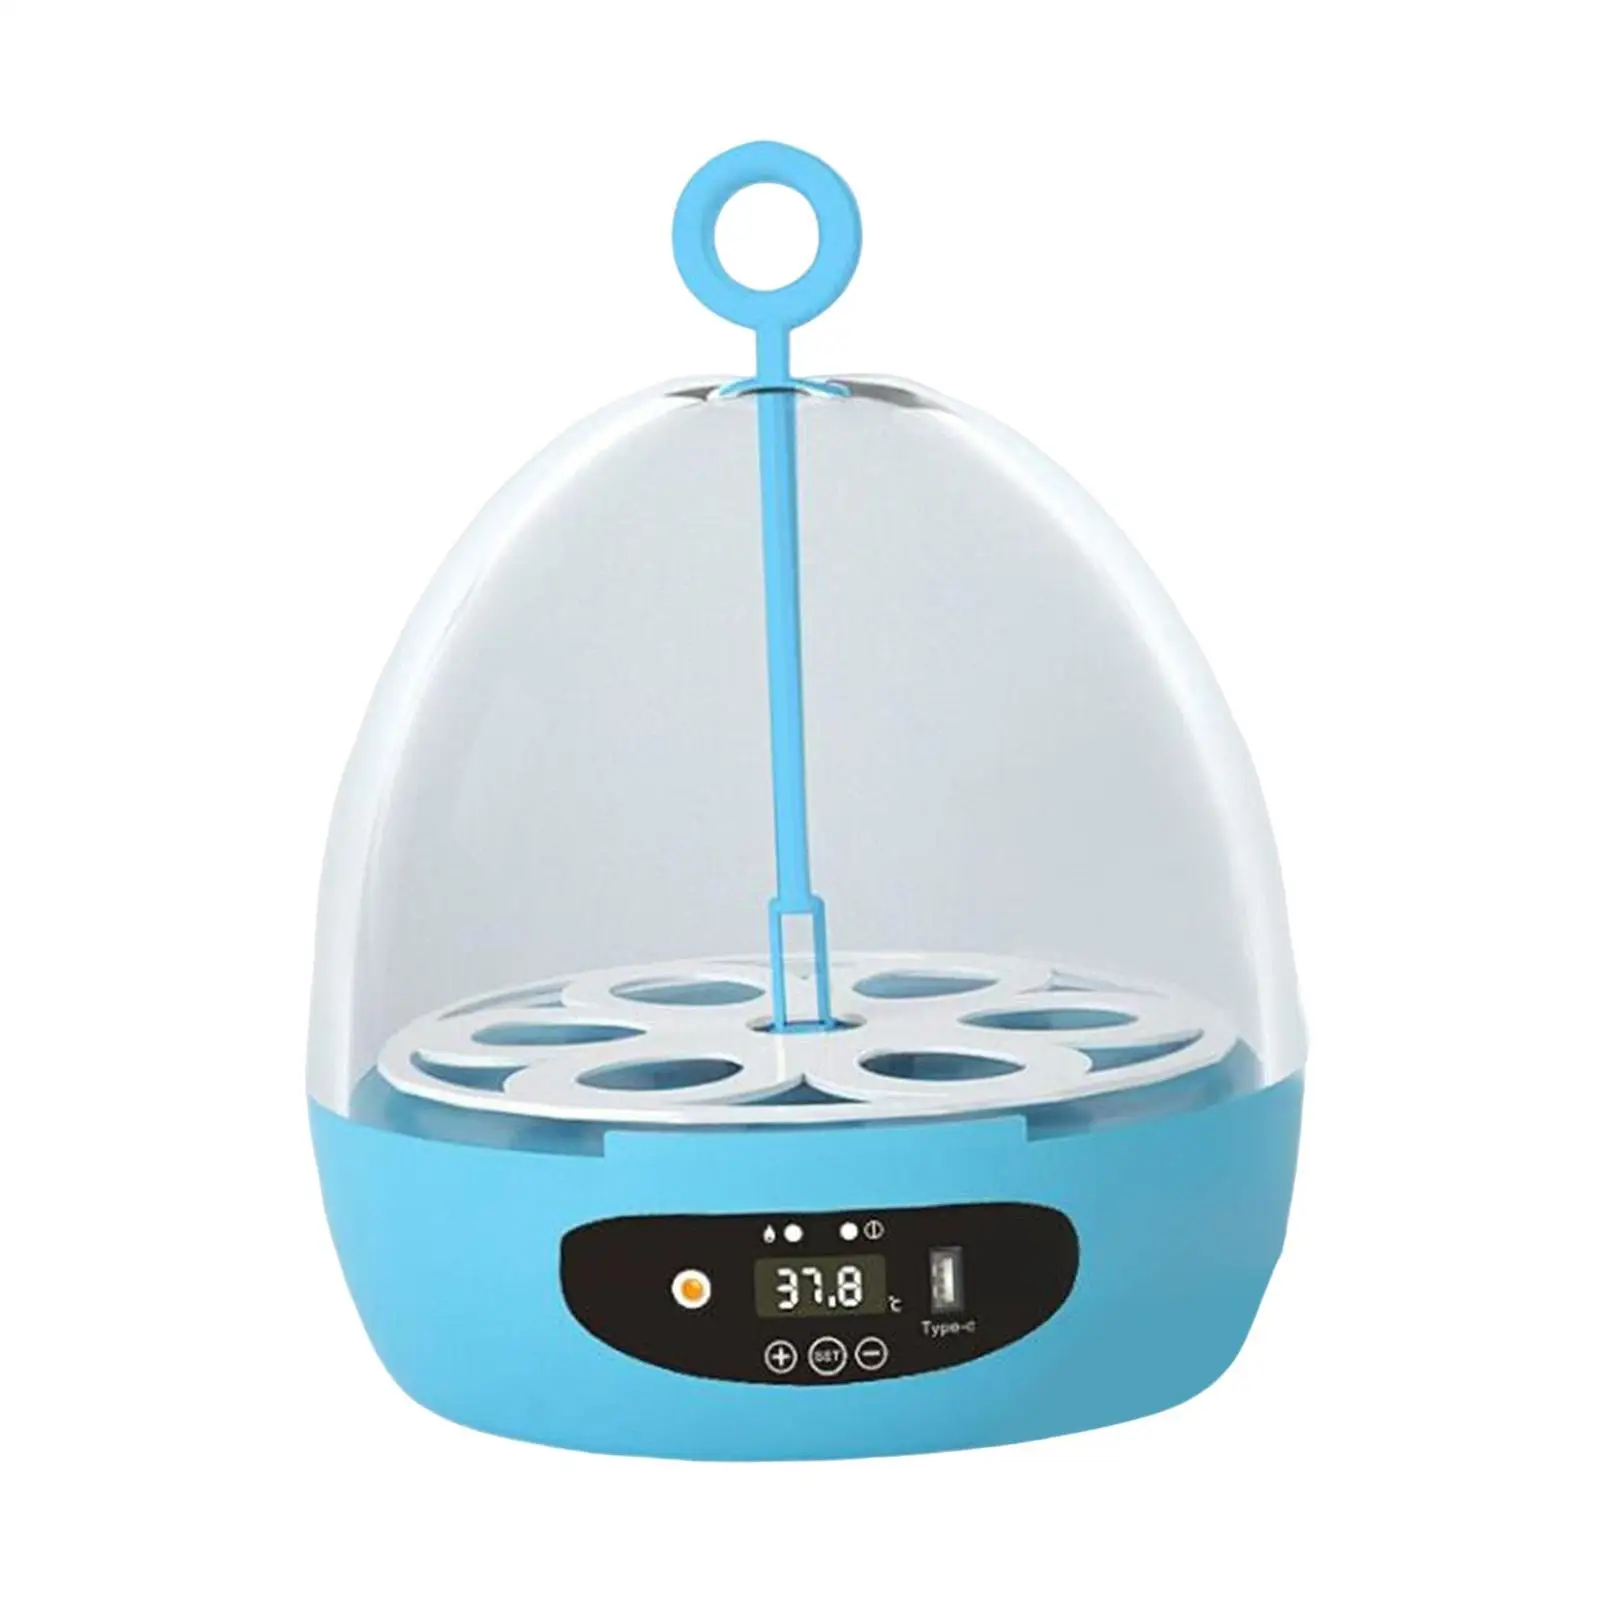 Electric Egg Incubator for Hatching Eggs USB Chicken Hatcher Hatching Light for Quail